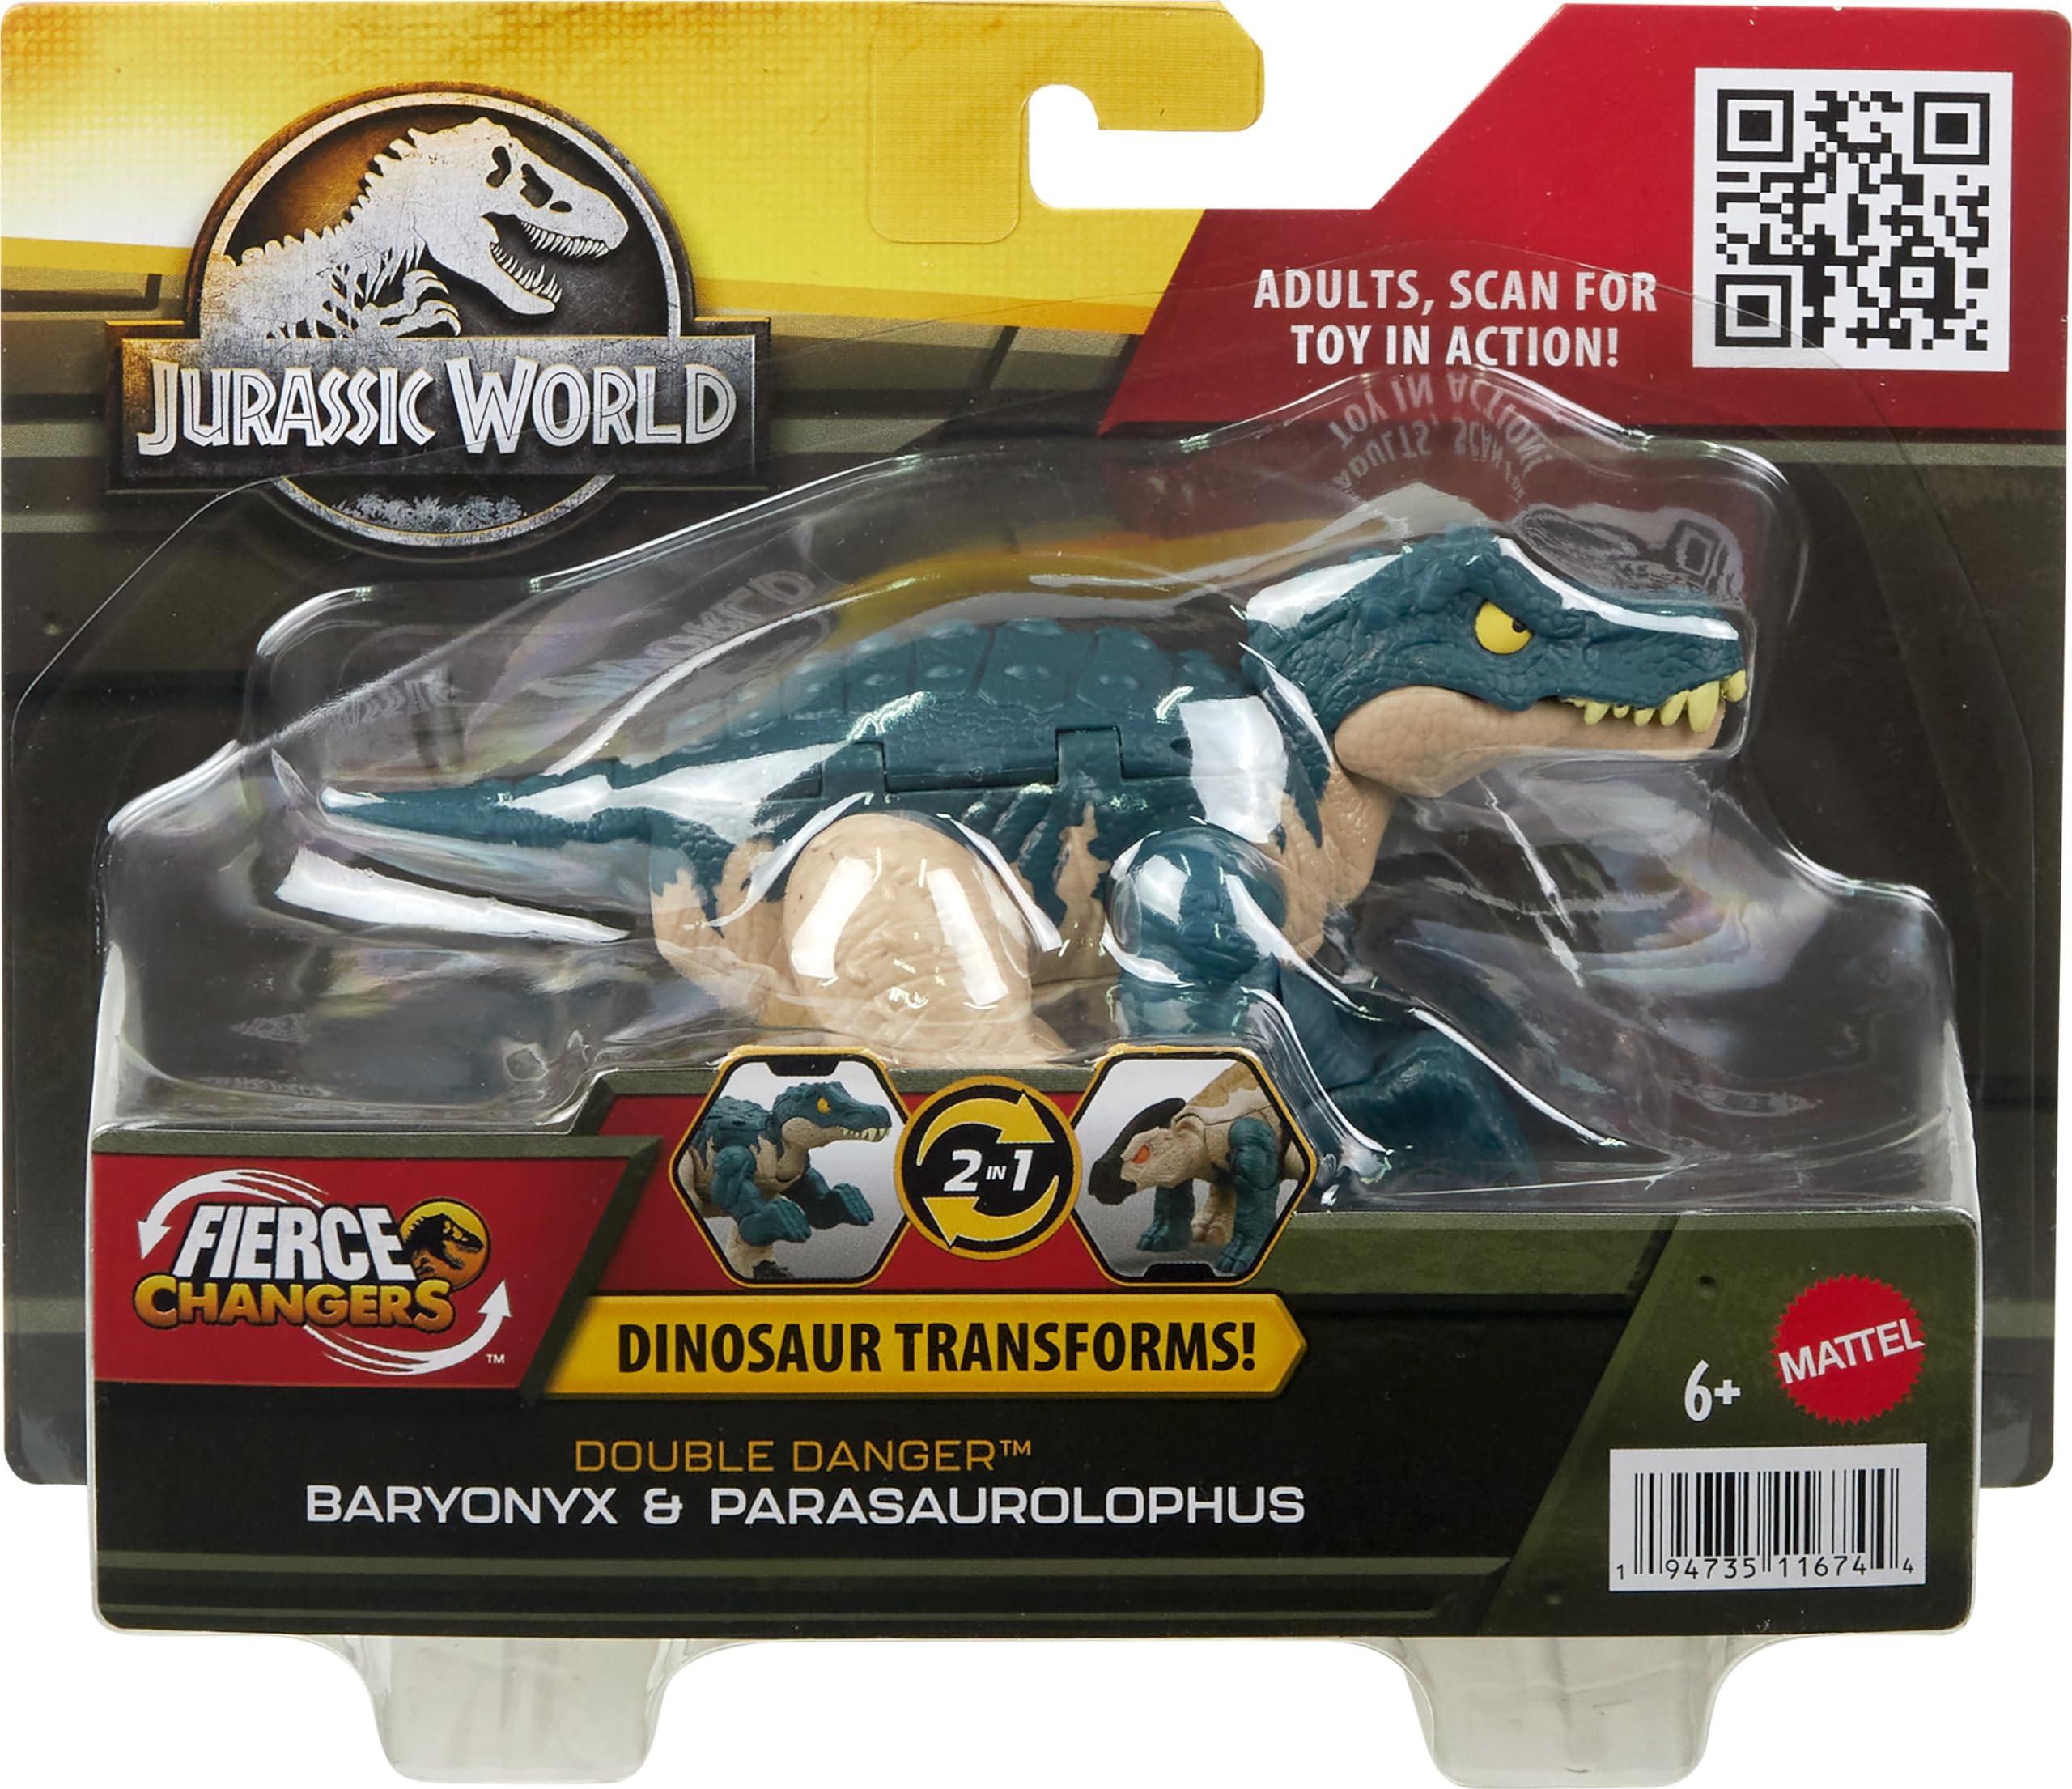 2-in-1 Mattel Jurassic World Transforming Dinosaur Figure Toy $6.99 + Free Shipping w/ Prime or on $35+